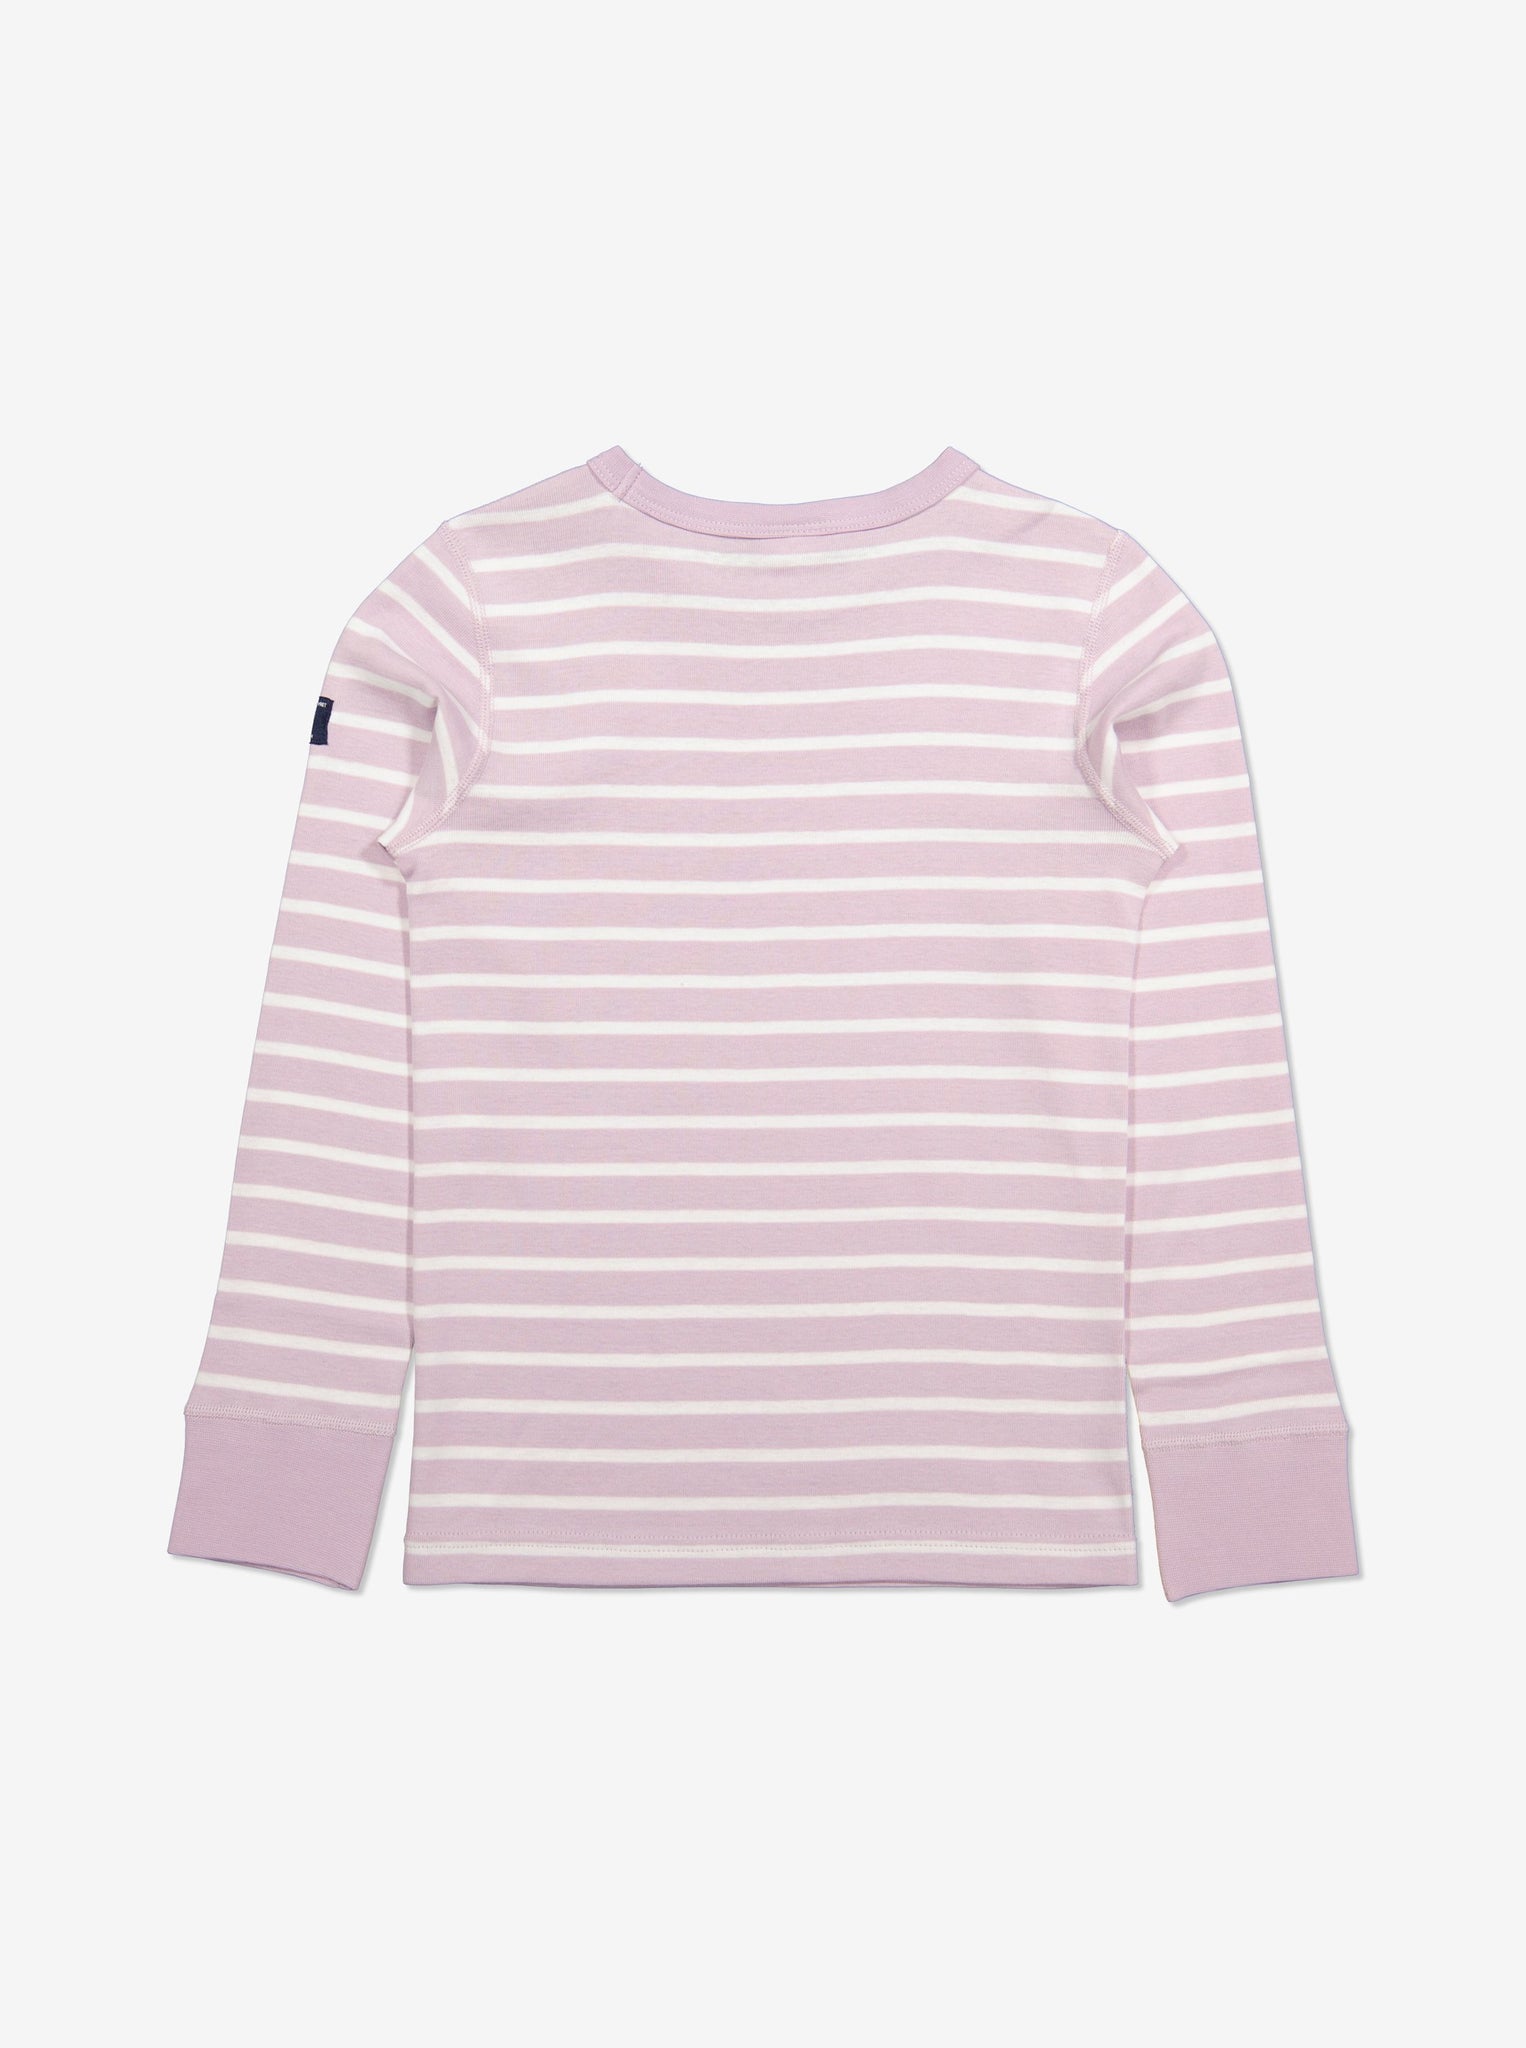  Organic Striped Pink Kids Top from Polarn O. Pyret Kidswear. Made with 100% organic cotton.